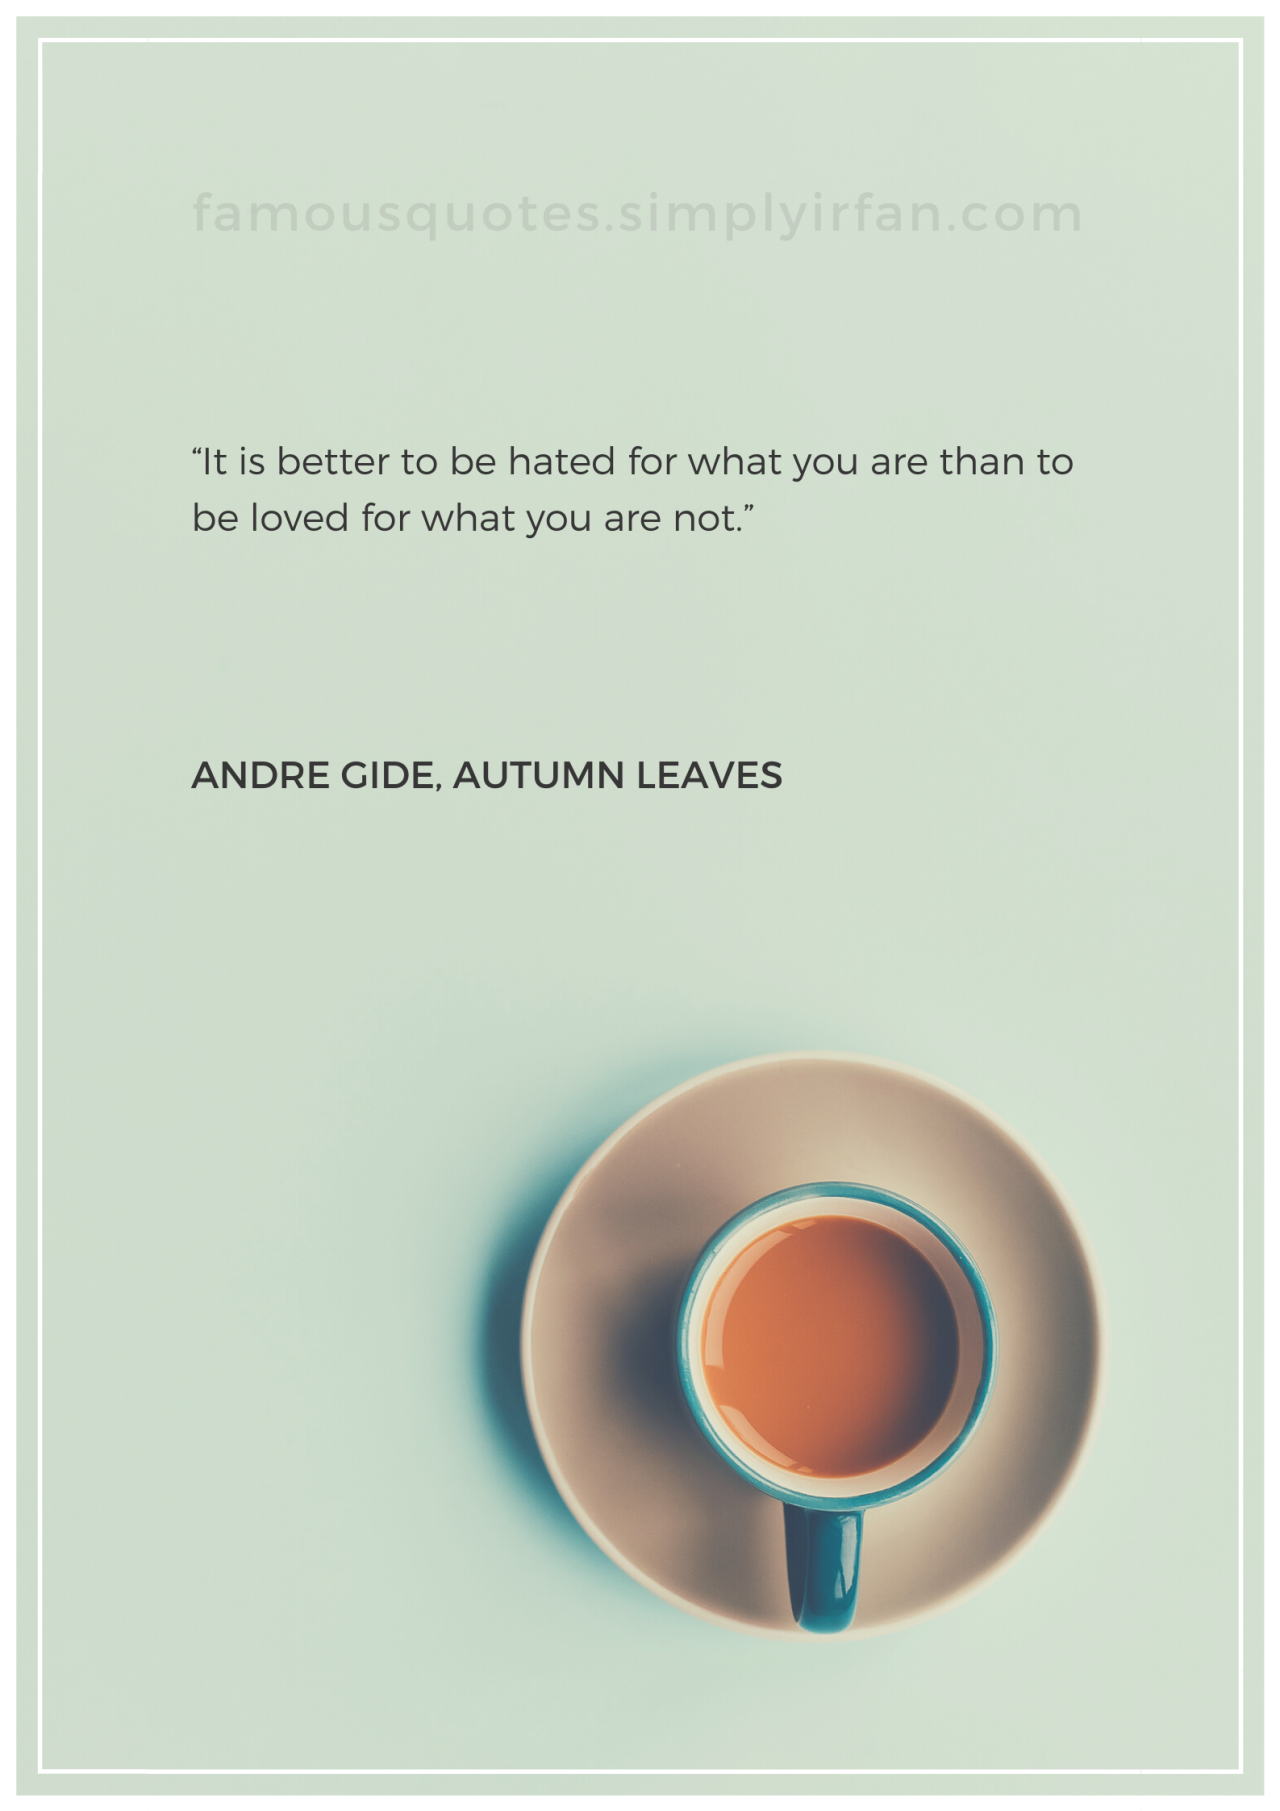 Famous Love Quote: "It is better to be hated for what you are than to be loved for what you are not."  by Andre Gide, Autumn Leaves